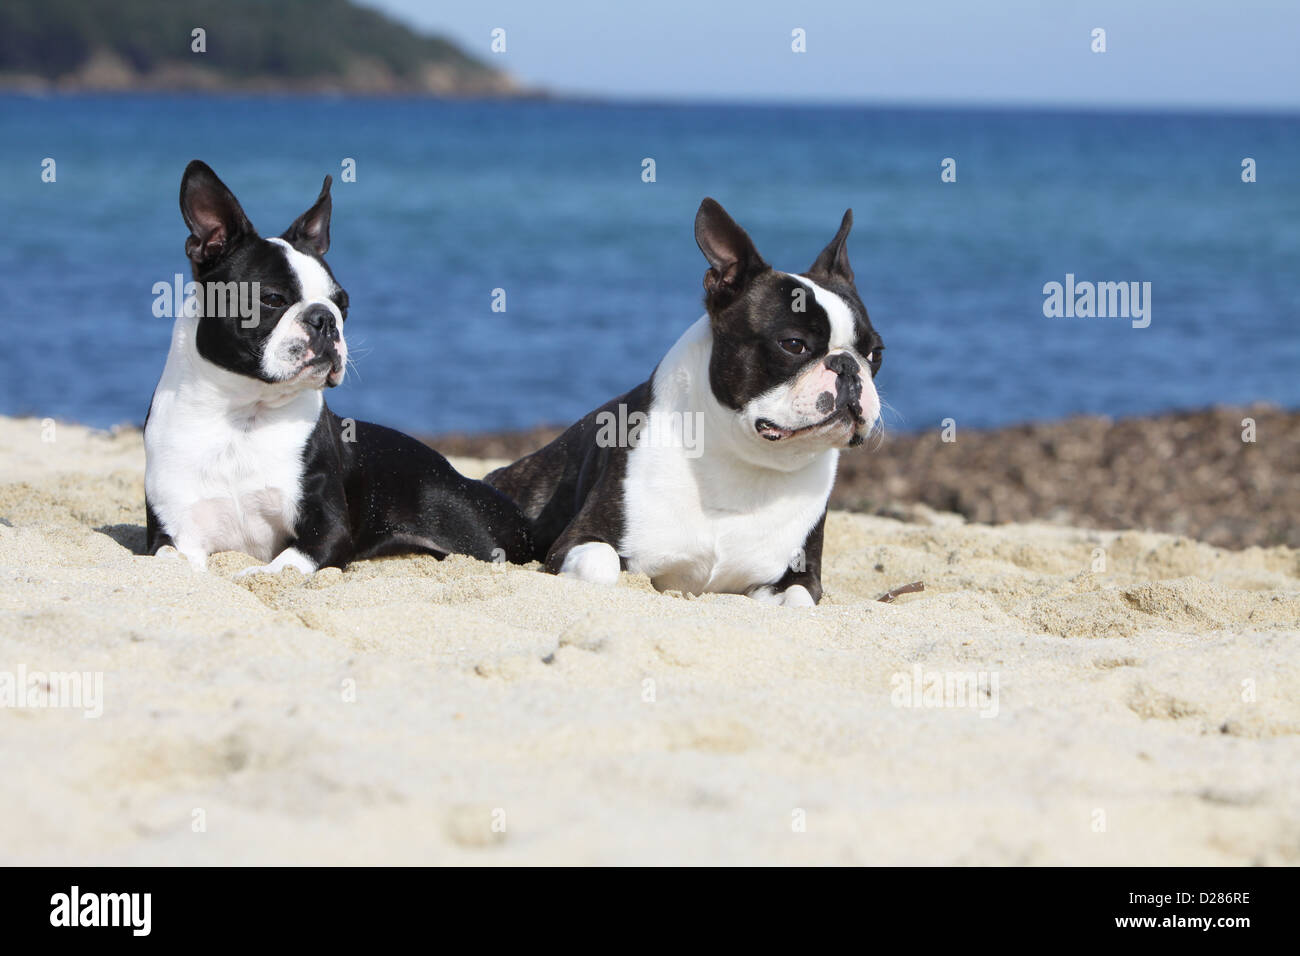 Dog Boston Terrier two adults different colors (white and brindle, white and black) lying on the beach Stock Photo